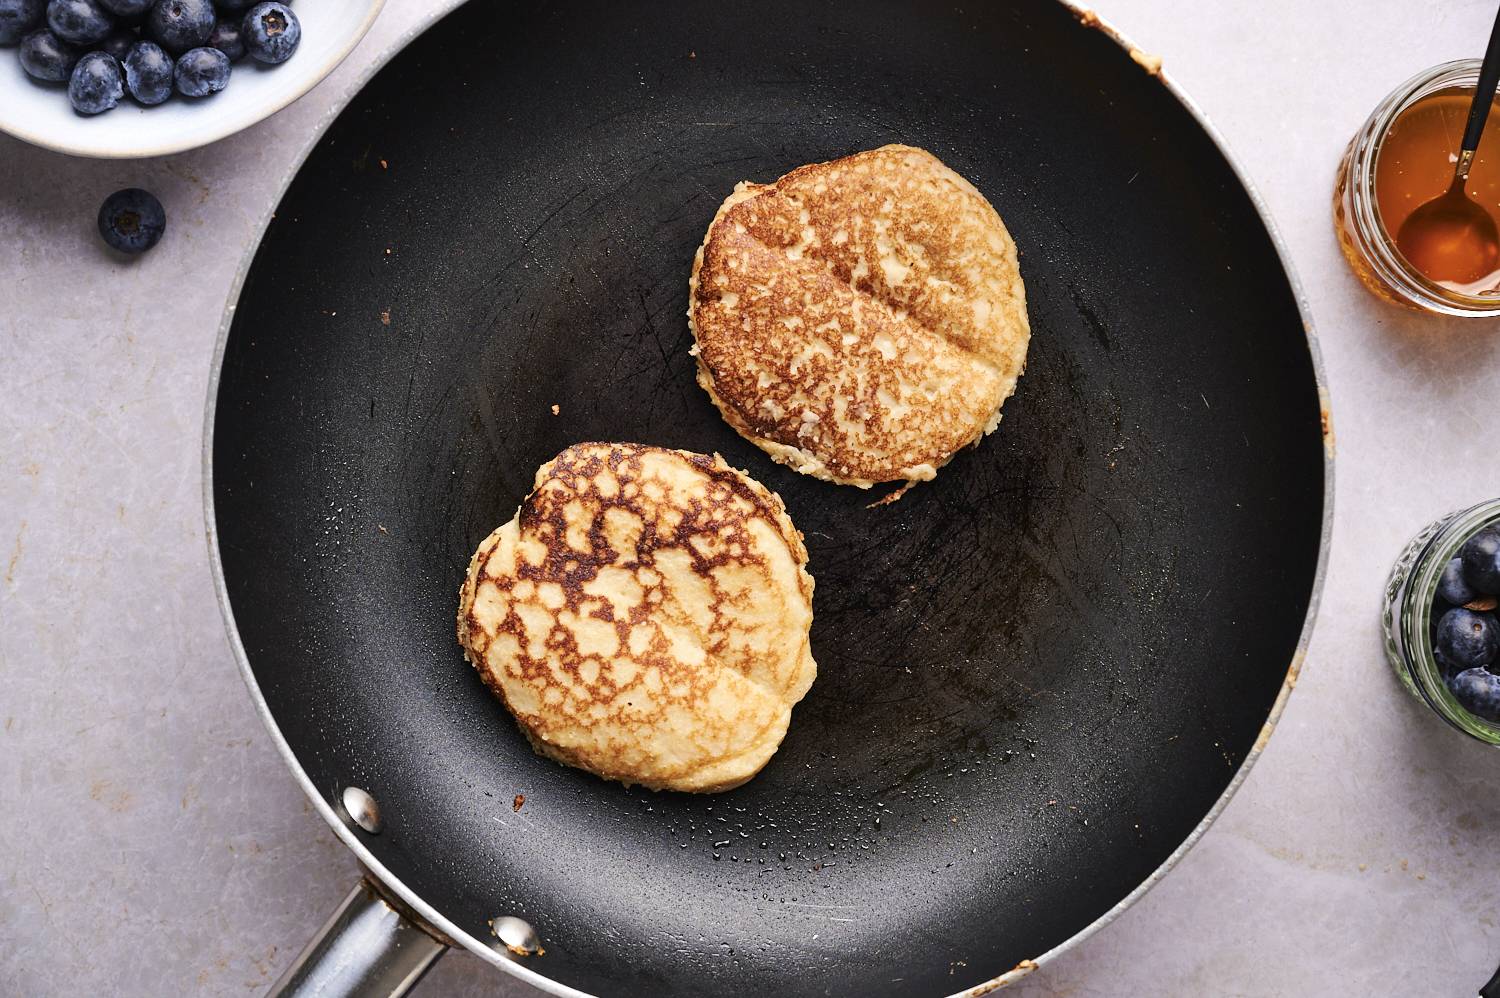 Almond flour pancakes cooking in a nonstick skillet with golden brown edges.